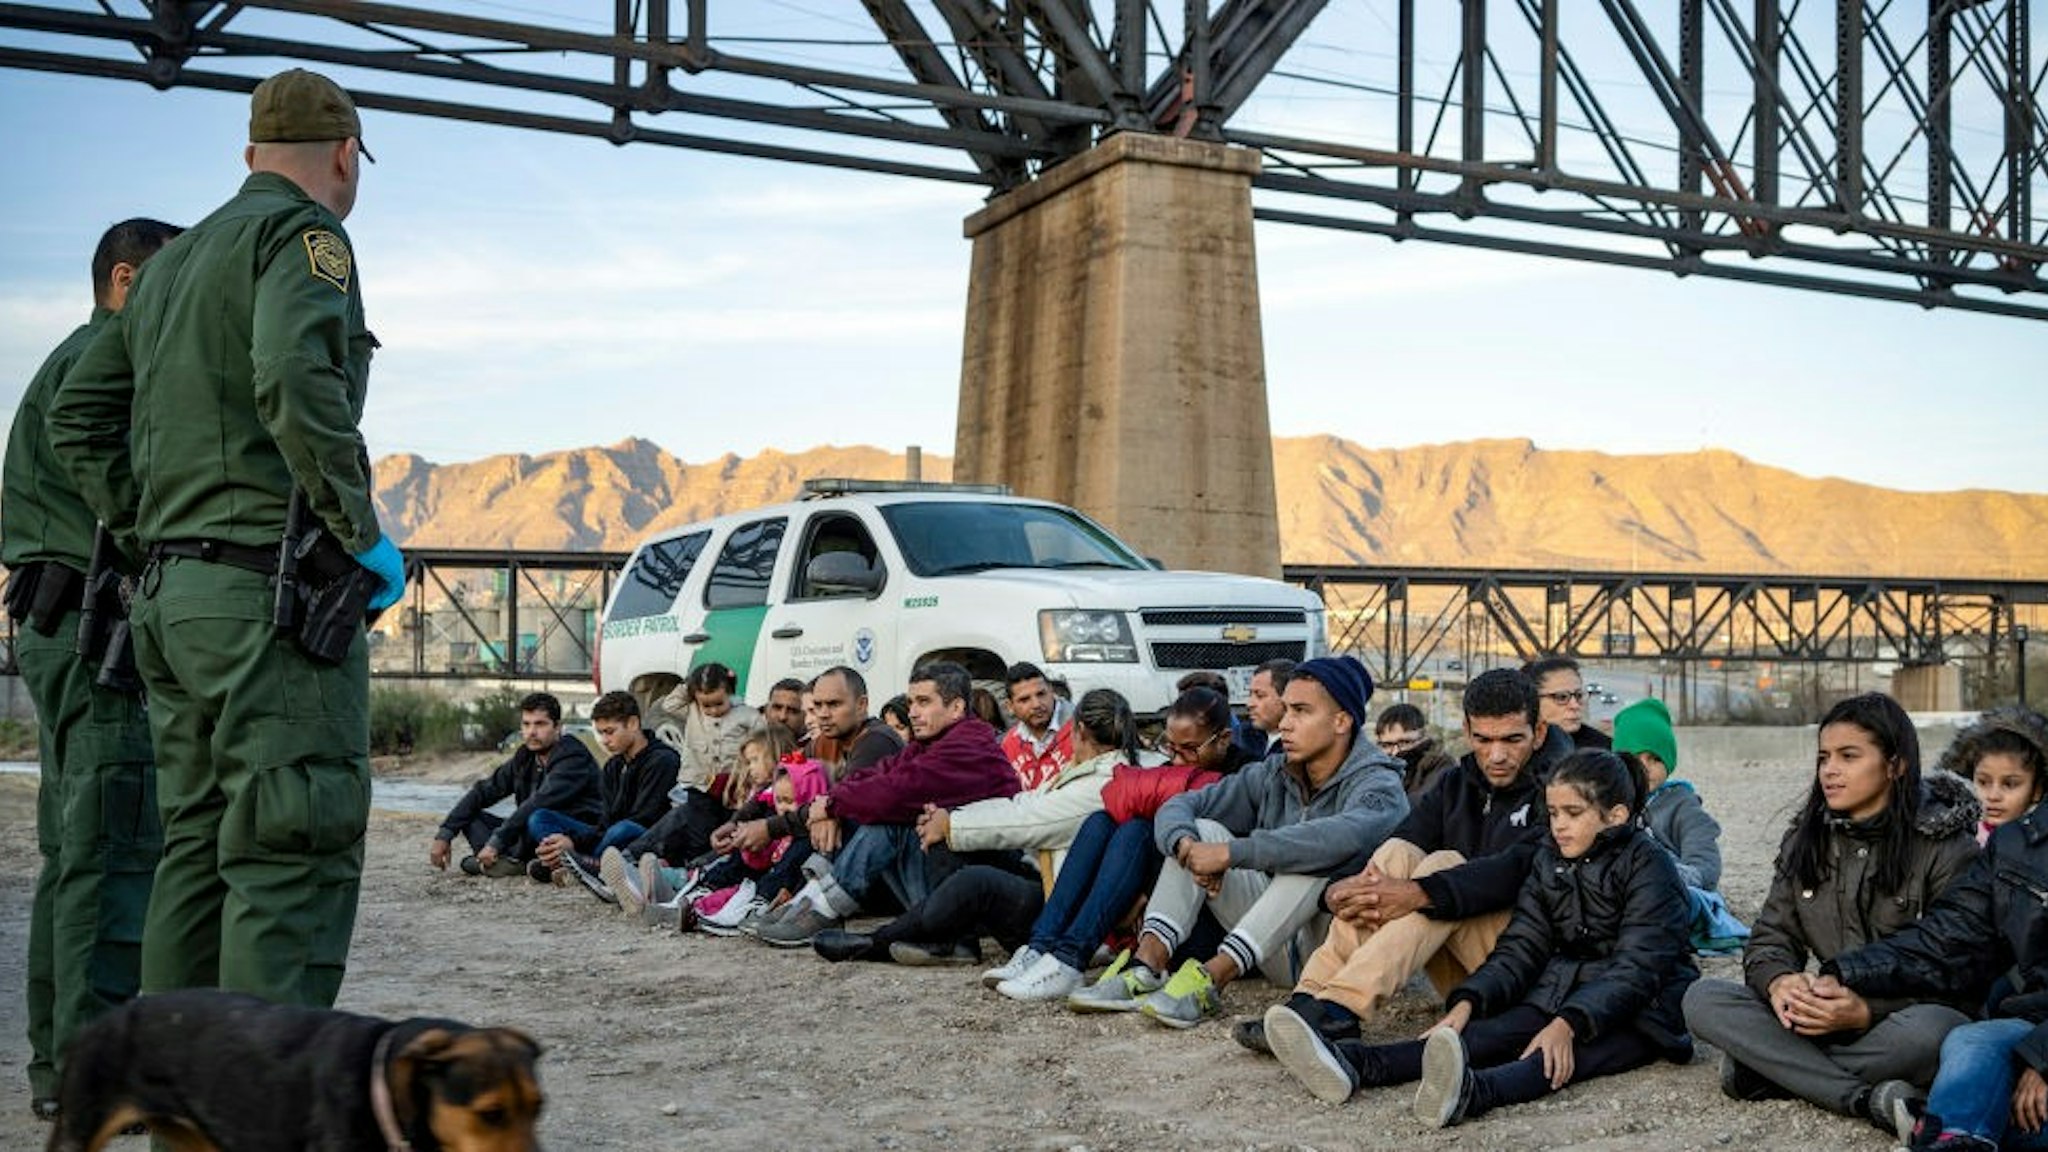 TOPSHOT - A group of about 30 Brazilian migrants, who had just crossed the border, sit on the ground near US Border Patrol agents, on the property of Jeff Allen, who used to run a brick factory near Mt. Christo Rey on the US-Mexico border in Sunland Park, New Mexico on March 20, 2019. - The militia members say they will patrol the US-Mexico border near Mt. Christo Rey, "Until the wall is built." In recent months, thousands of Central Americans have arrived in Mexico in several caravans in the hope of finding a better life in the United States. US President Donald Trump has branded such migrants a threat to national security, demanding billions of dollars from Congress to build a wall on the southern US border. (Photo by